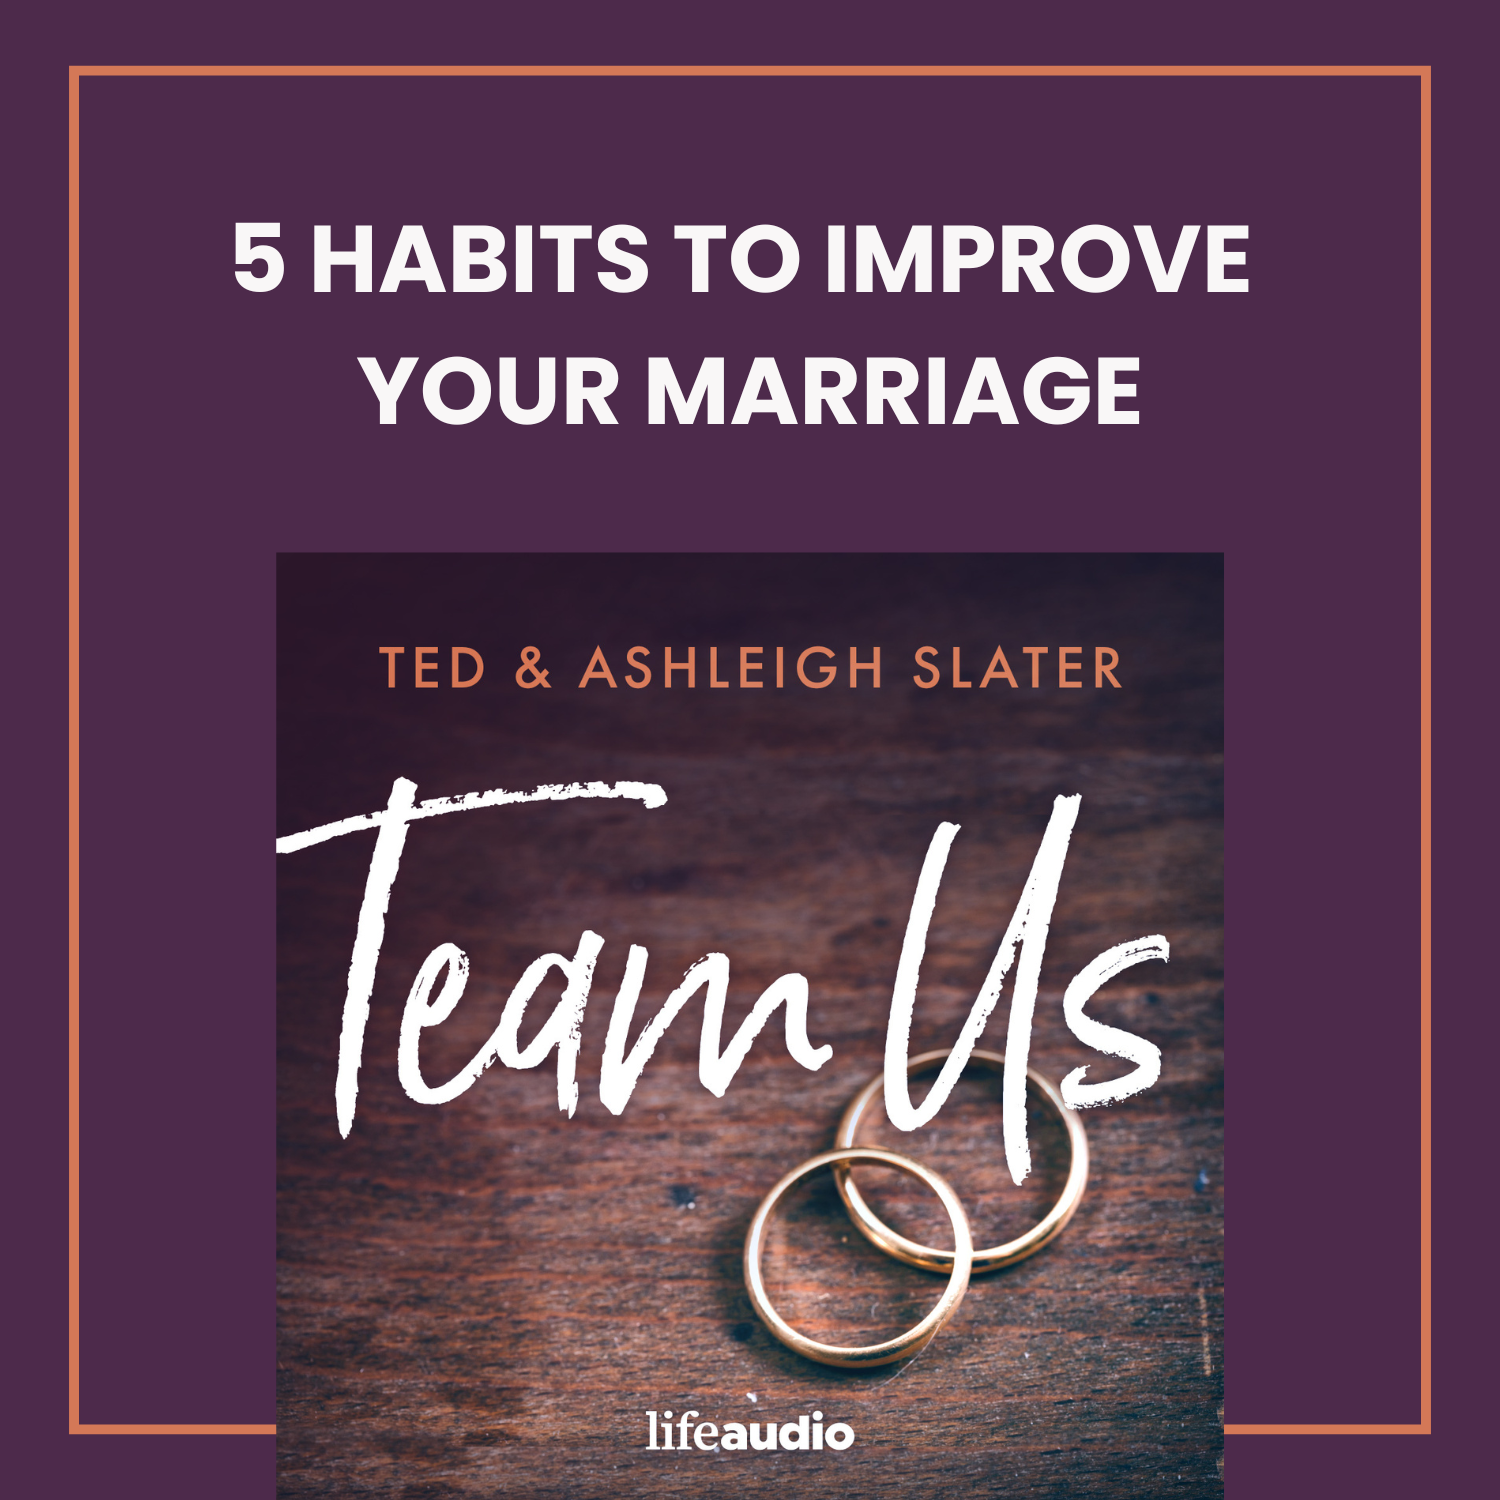 5 Habits to Improve Your Marriage